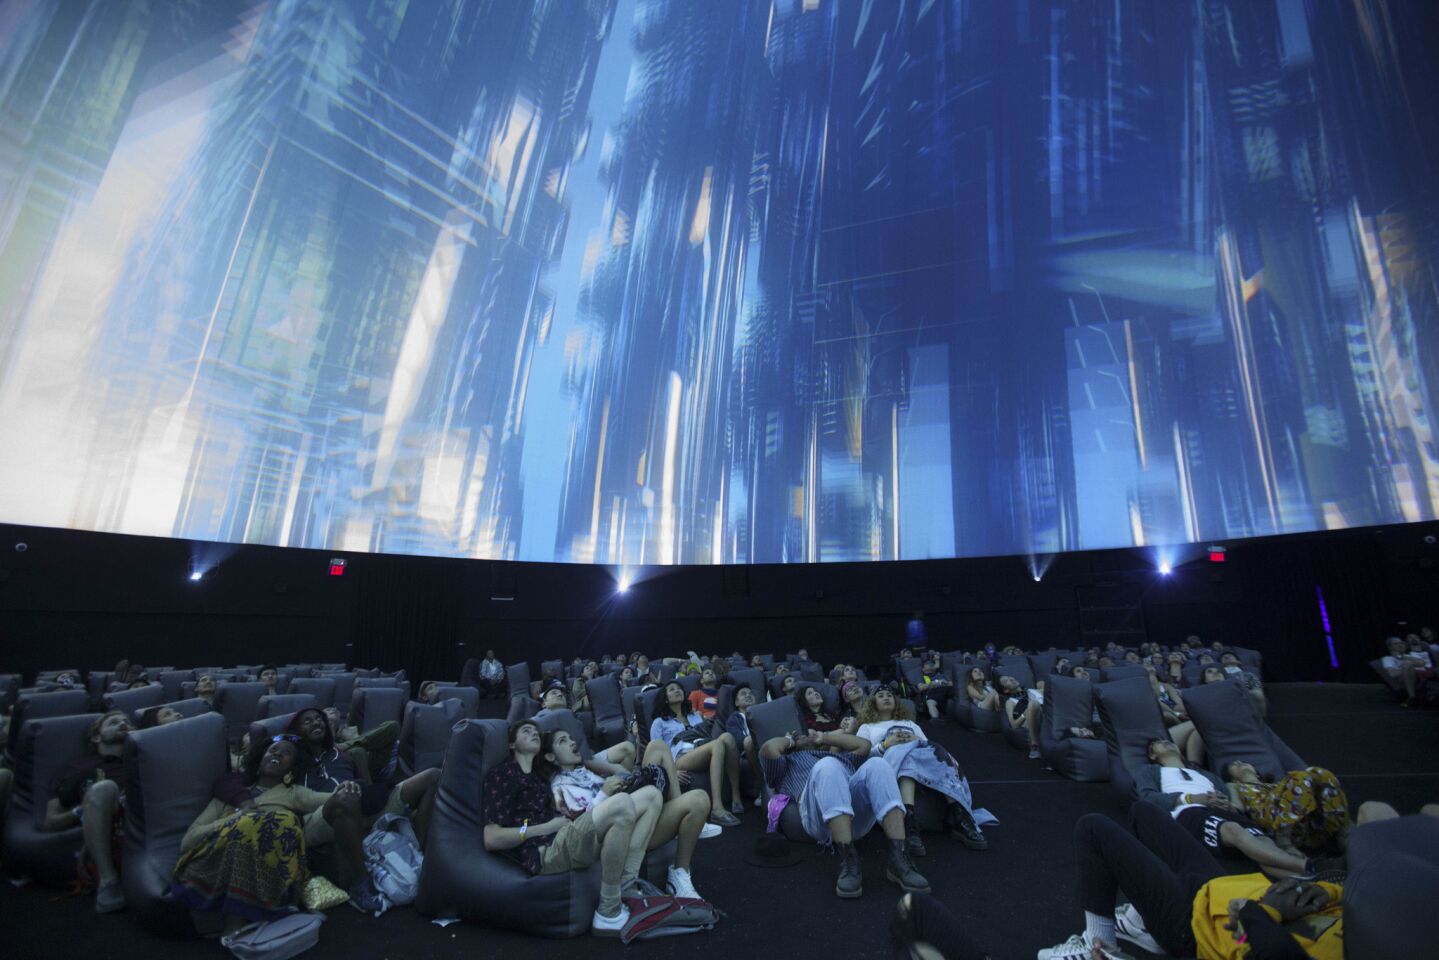 Attendees watch The Antarctic powered by HP, a 360 degree sensory experience inside a large-scale projection dome during weekend one of the three-day Coachella Valley Music and Arts Festival at the Empire Polo Grounds on Saturday, April 15, 2017 in Indio, Calif. (Patrick T. Fallon/ For The Los Angeles Times)